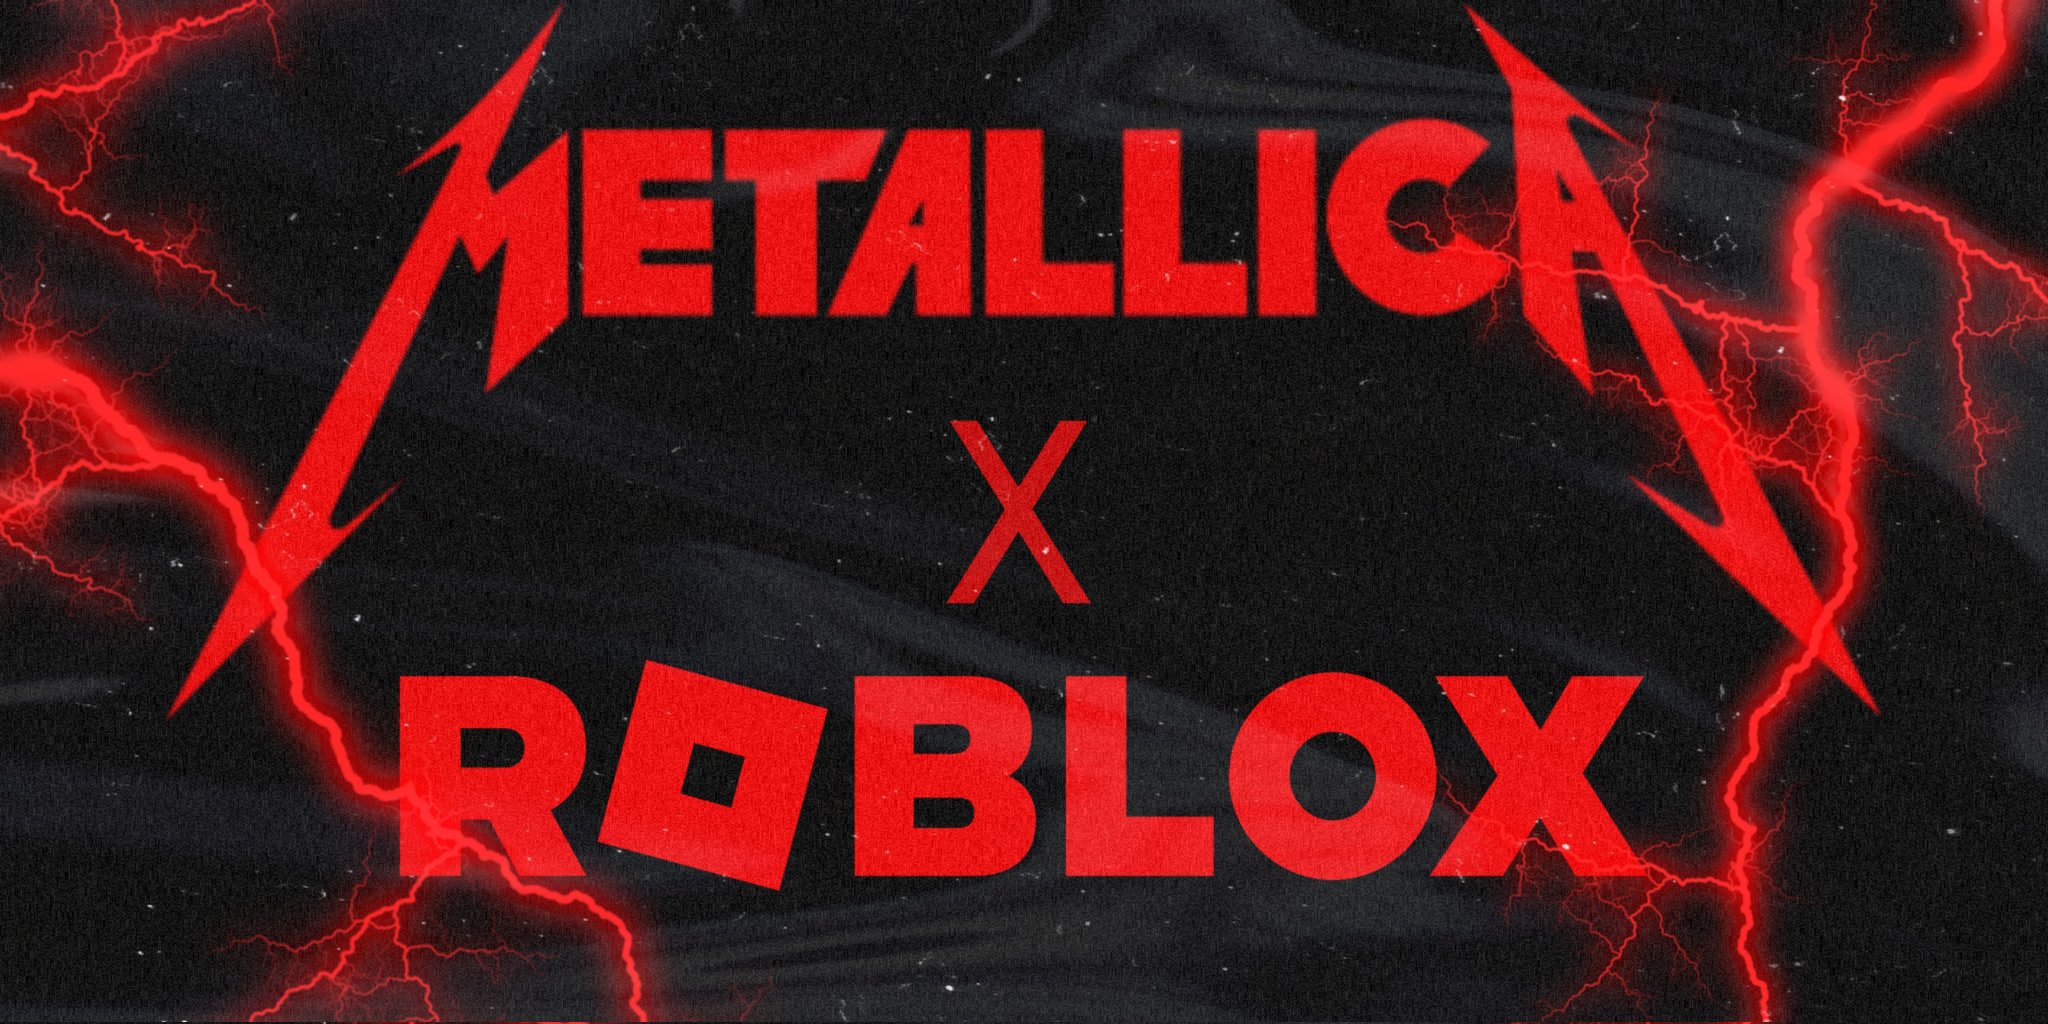 Roblox Apeirophobia News on X: #Metallica has collaborated with